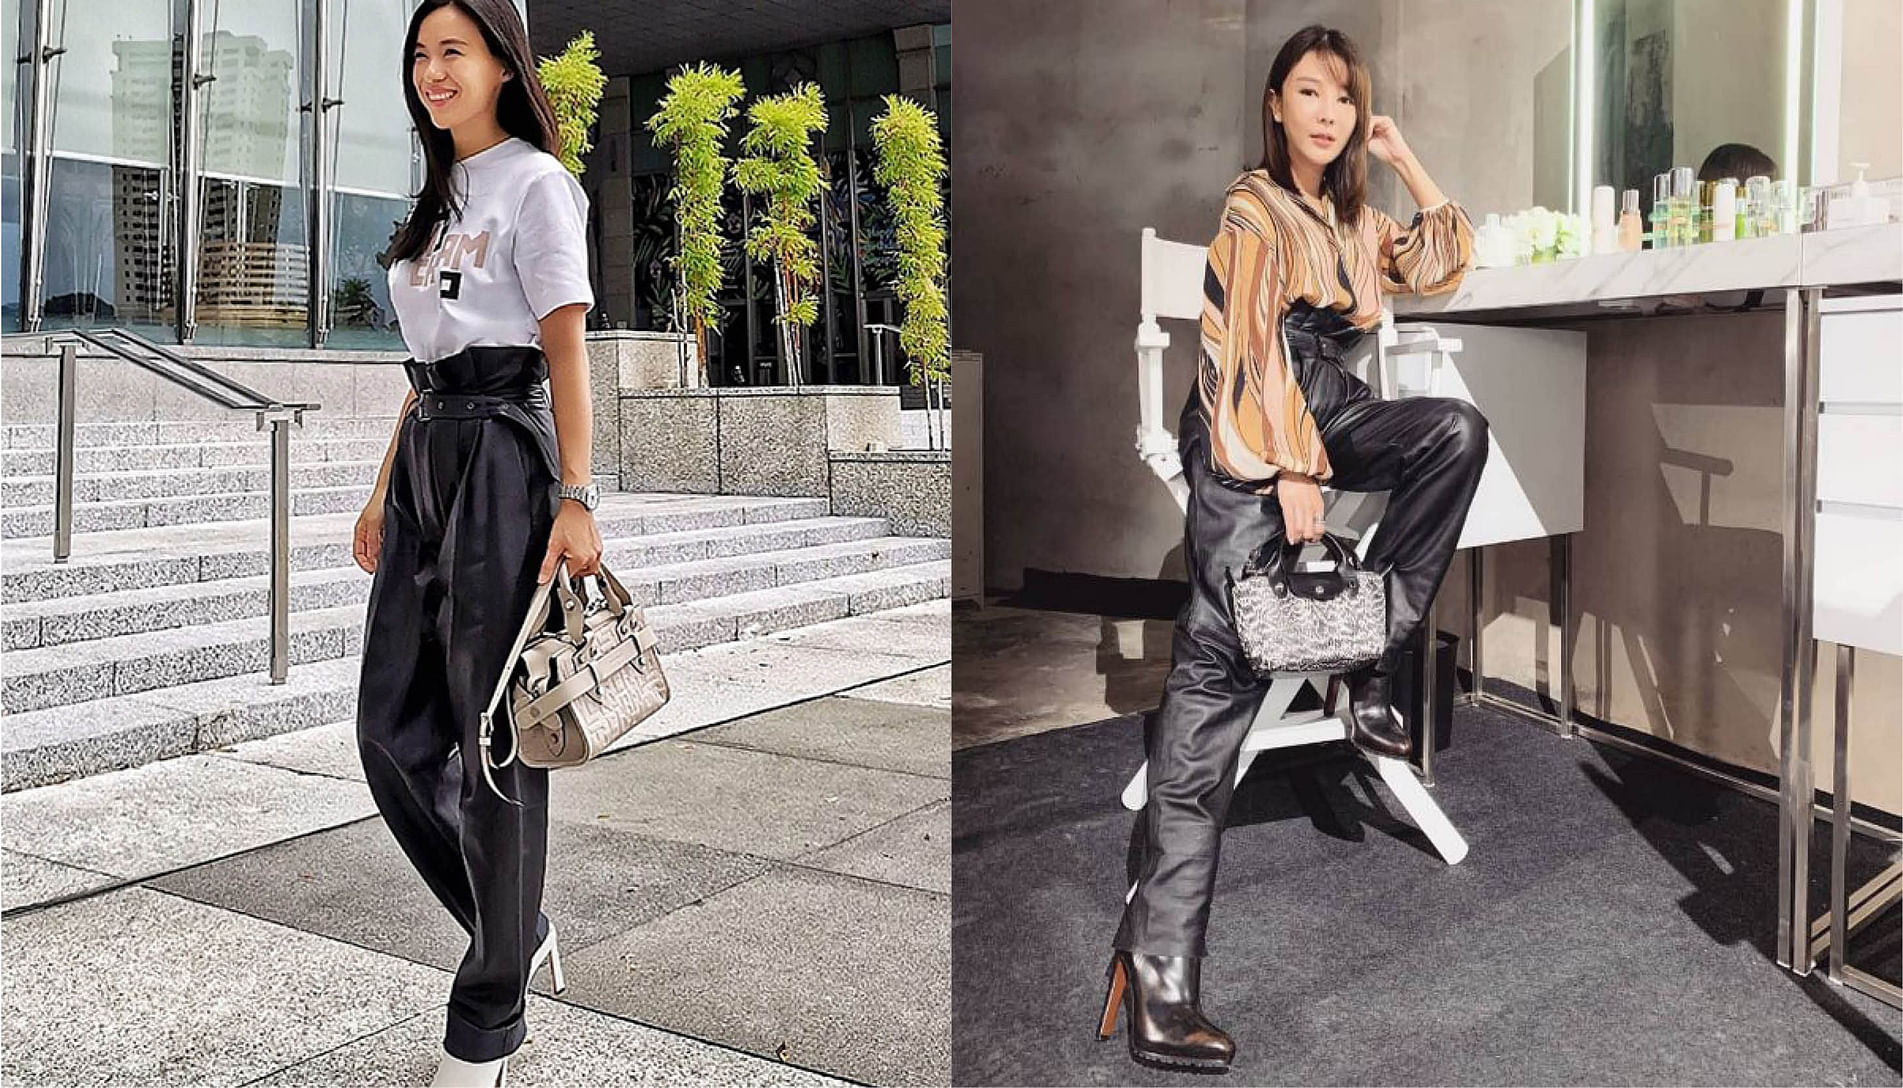 https://media.womensweekly.com.sg/source/2019/11/Paperbag-pants-Feature-01.jpg?compress=true&quality=80&w=732&dpr=2.6